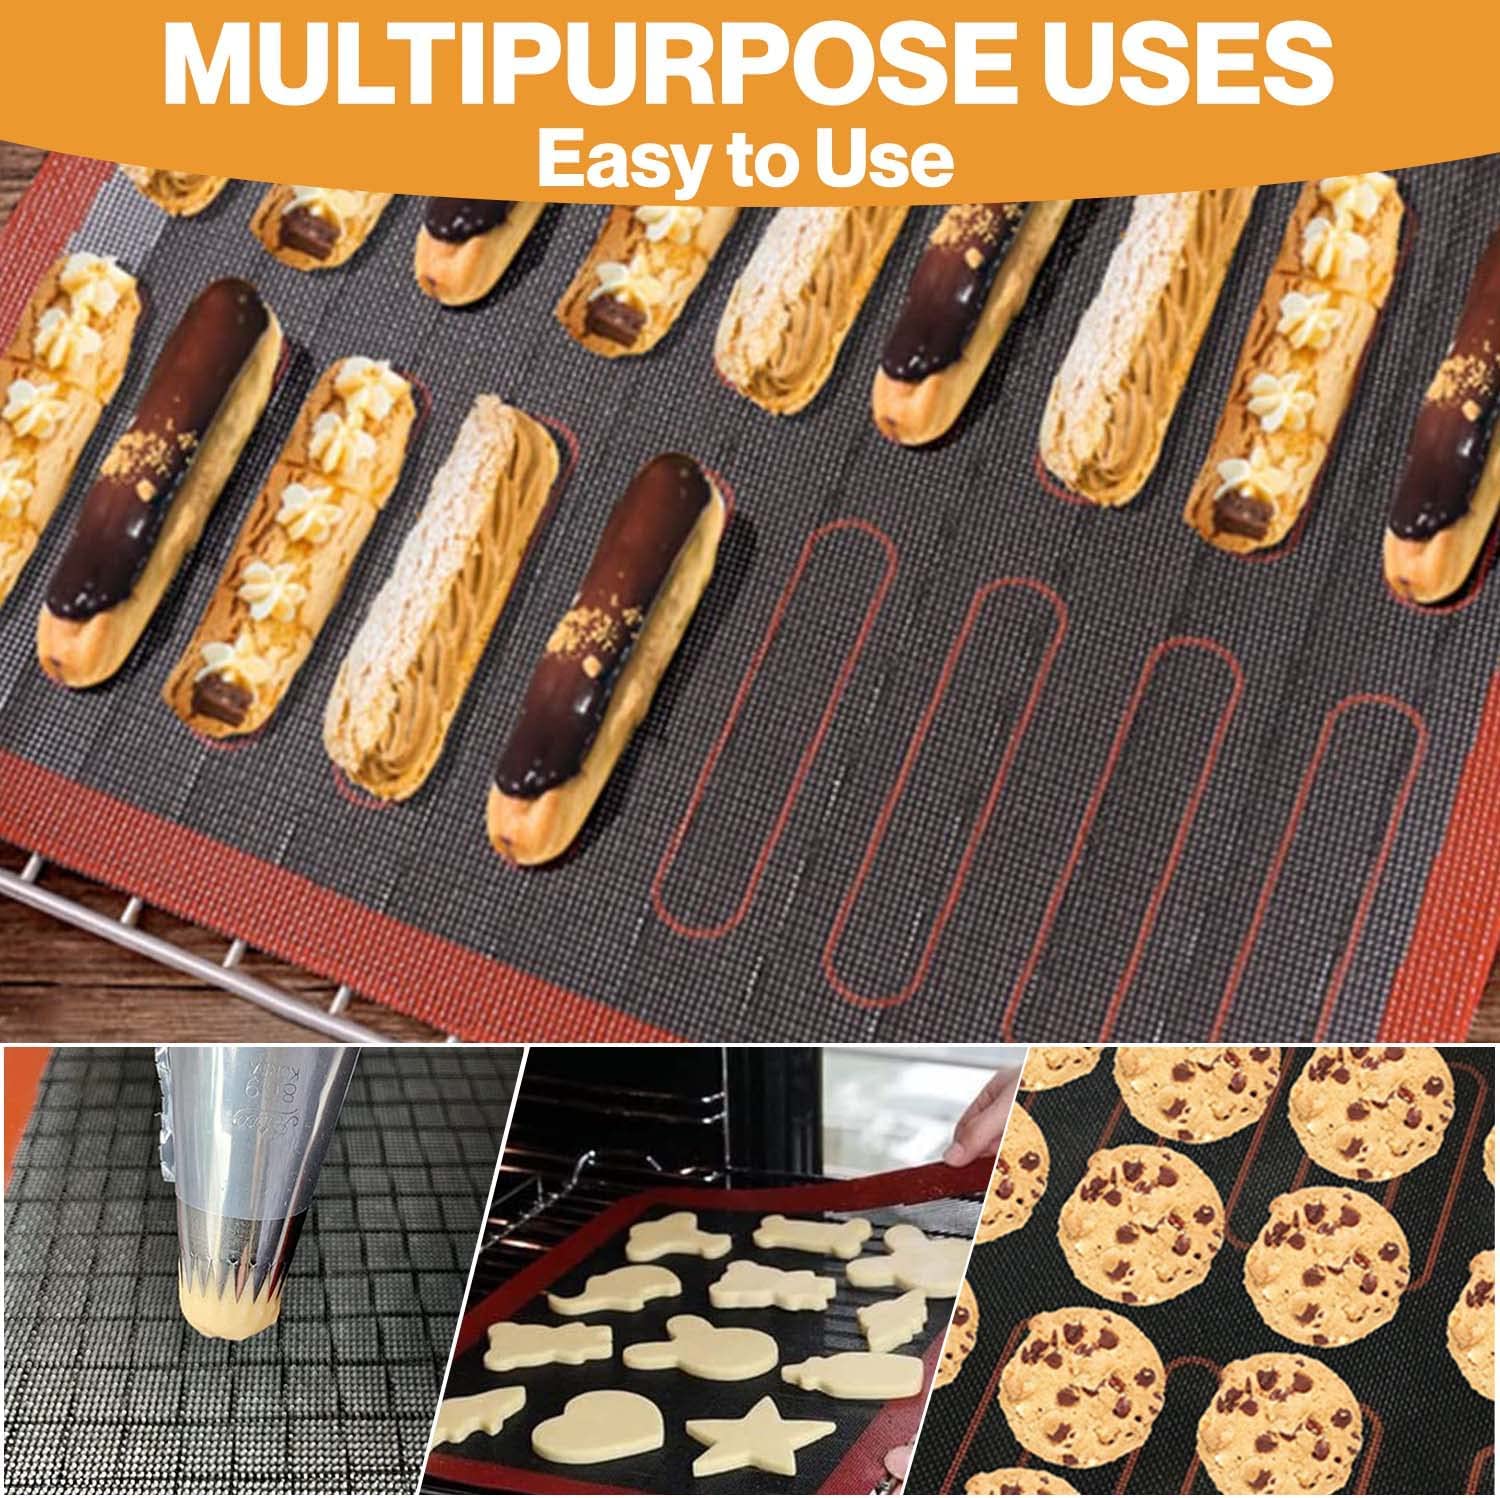 Lilymeche Concept - Perforated Silicone Baking Mat(2pc), BPA Free Larg